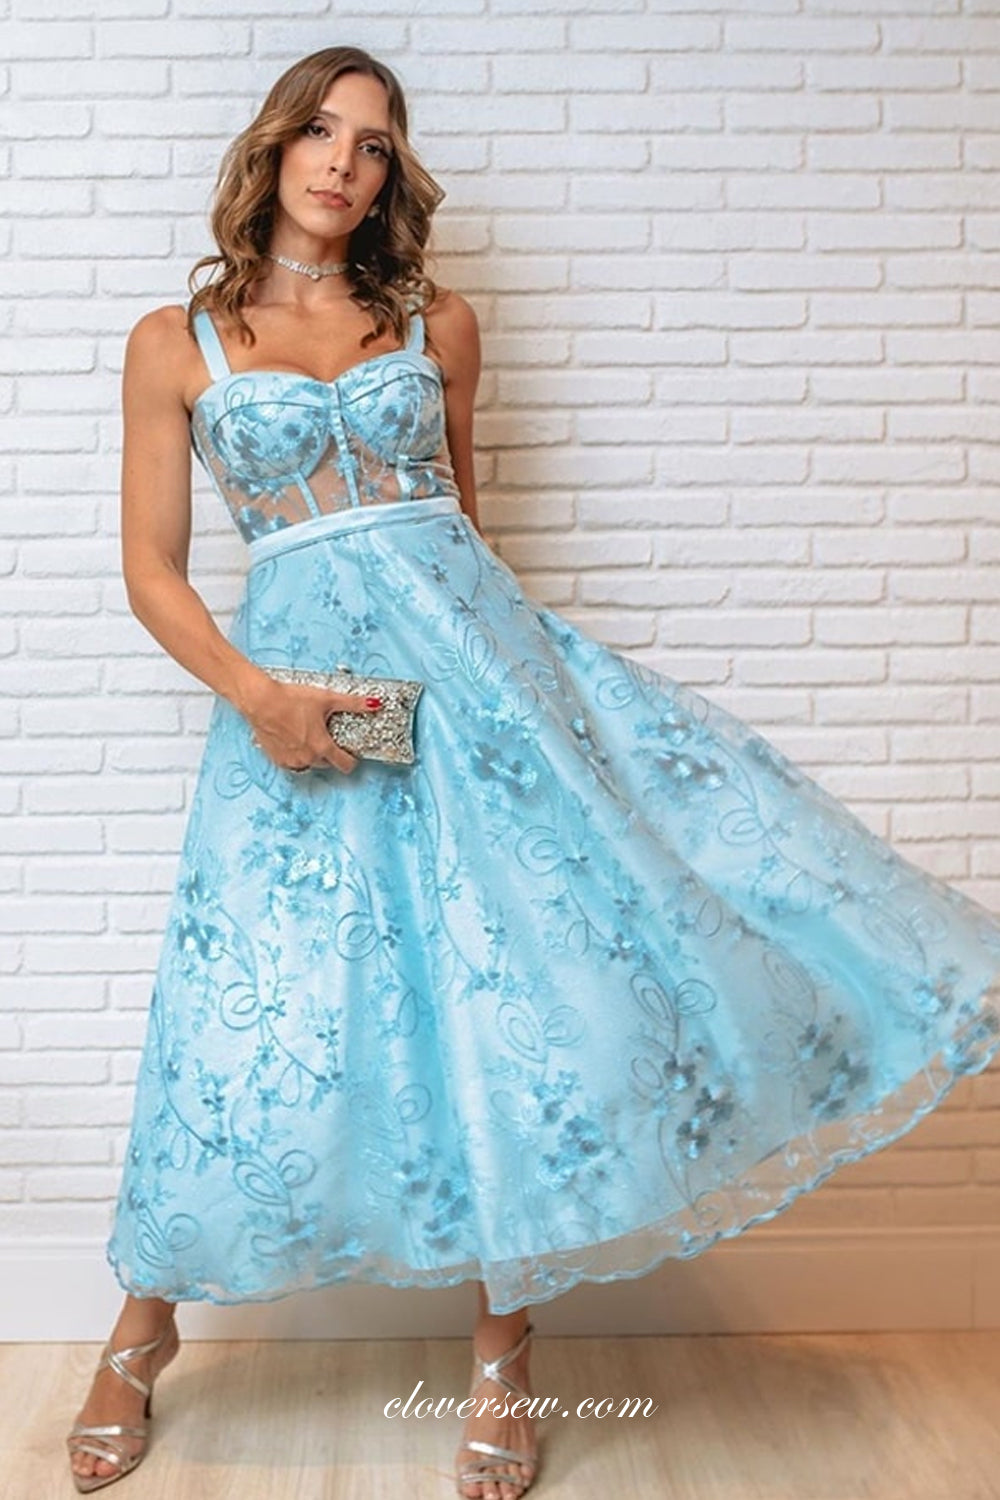 Blue Lace Sweet Sleeveless A-line Party Dresses, CP0697